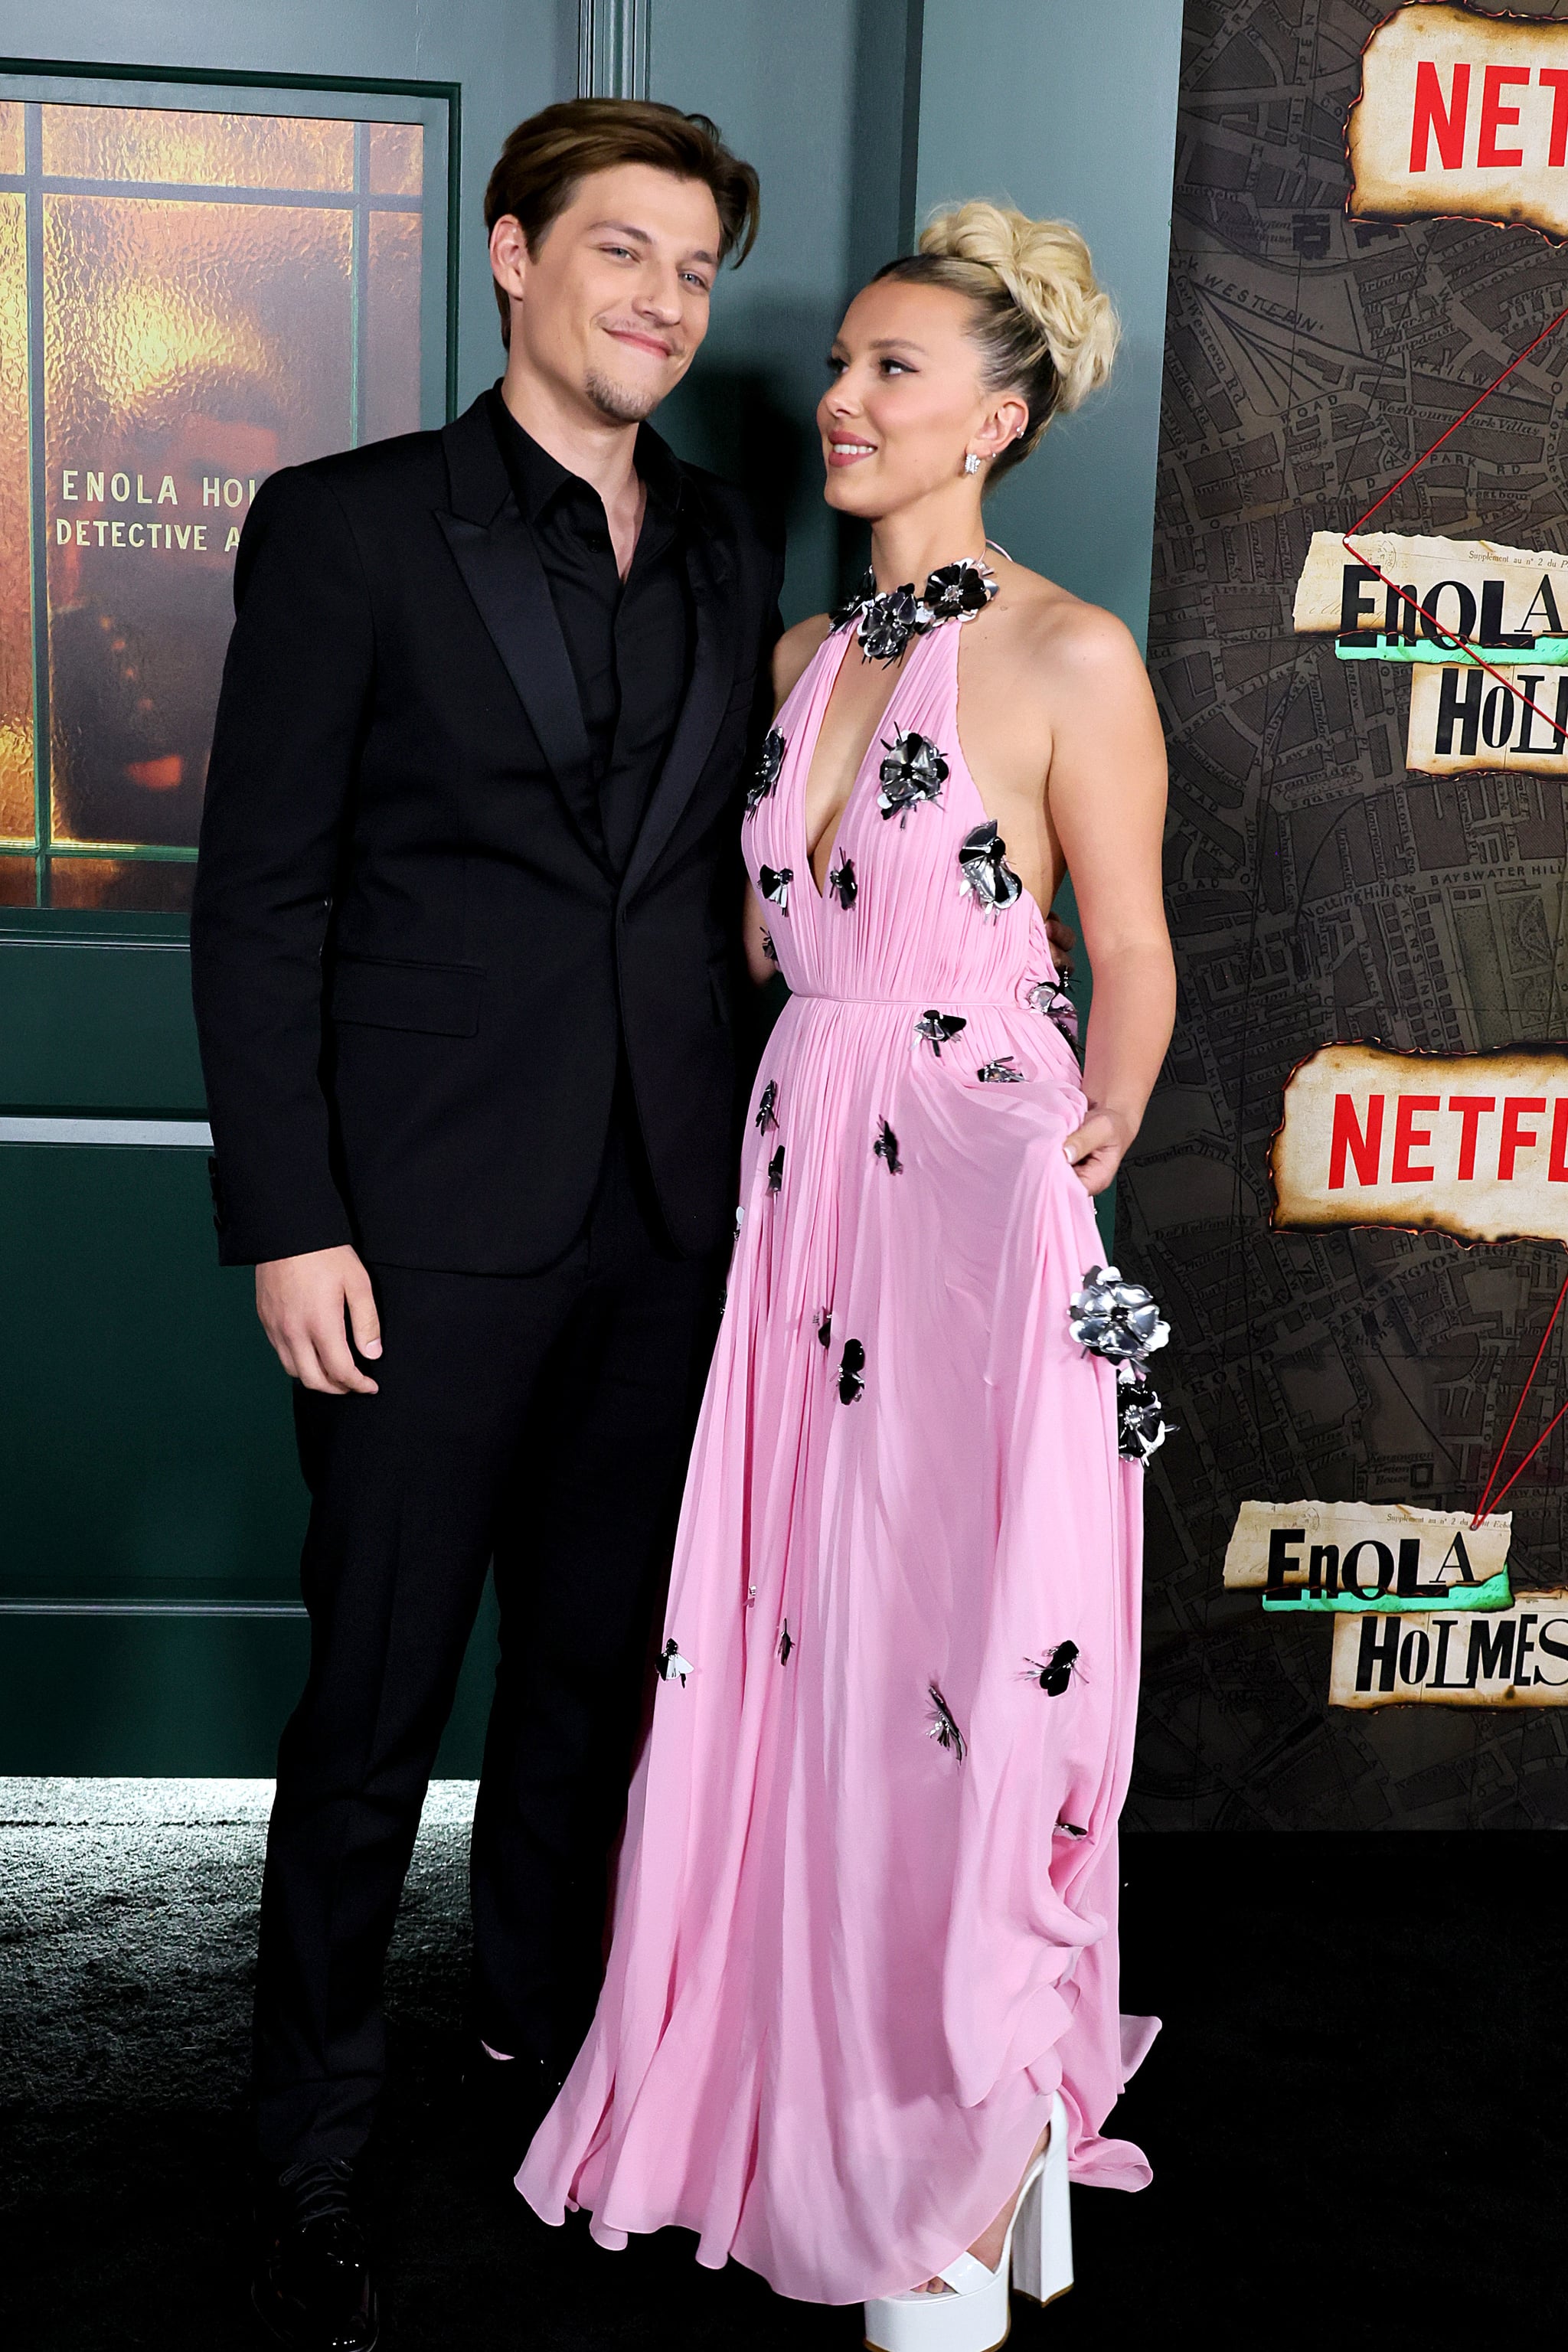 Millie Bobby Brown and Jake Bongiovi make red carpet debut as a